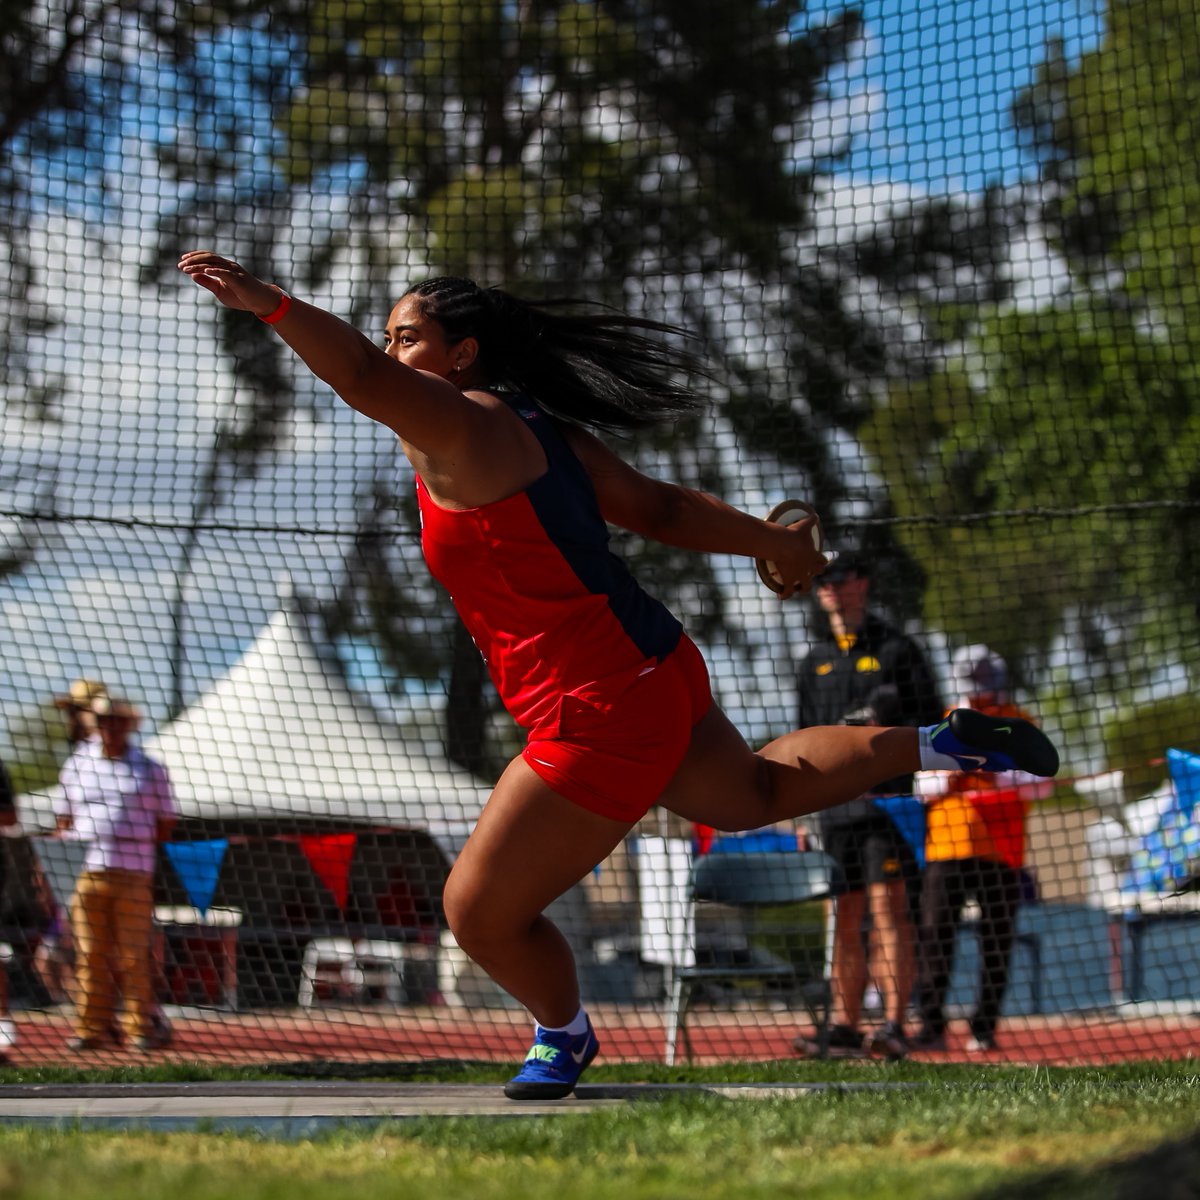 𝐃𝐈𝐒𝐂𝐔𝐒 𝐅𝐈𝐍𝐀𝐋

Tapenisa Havea finishes second in the women's discus on day two of the Tucson Throws Elite Classic! 

#BearDown | #BeLezoLike